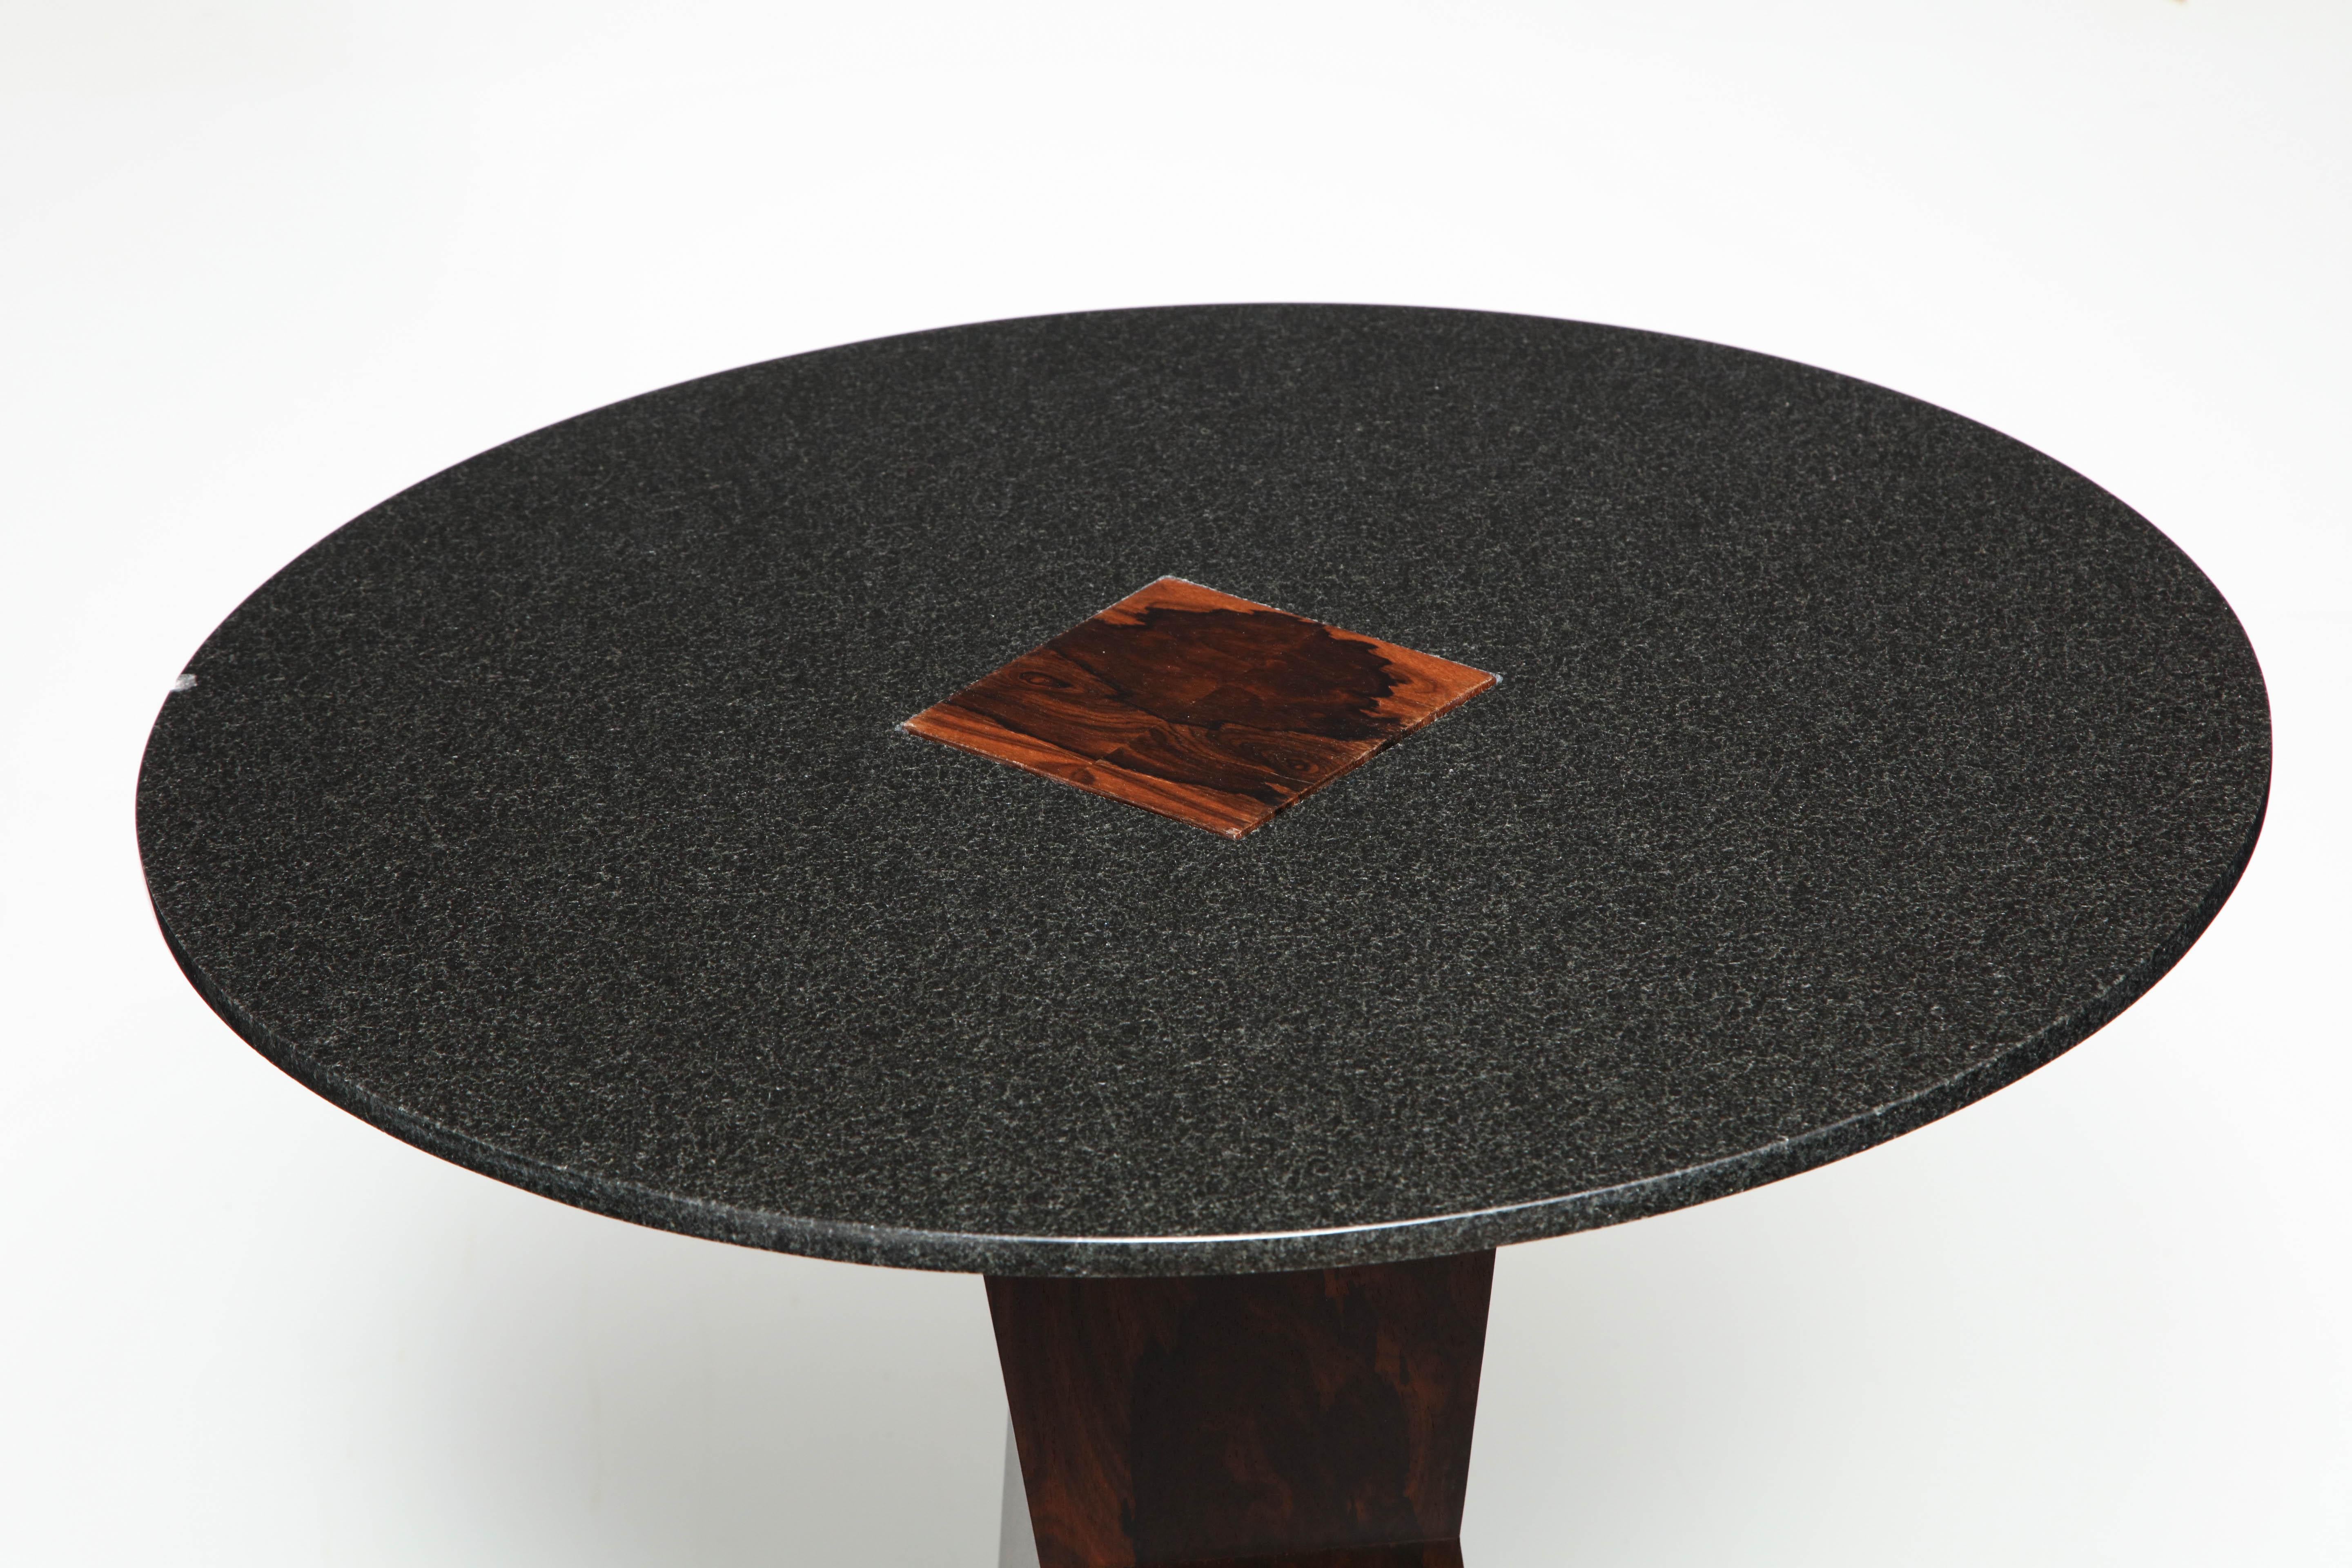 Patinated Absolute Black Granite Side Table with Sculptural Wood Base